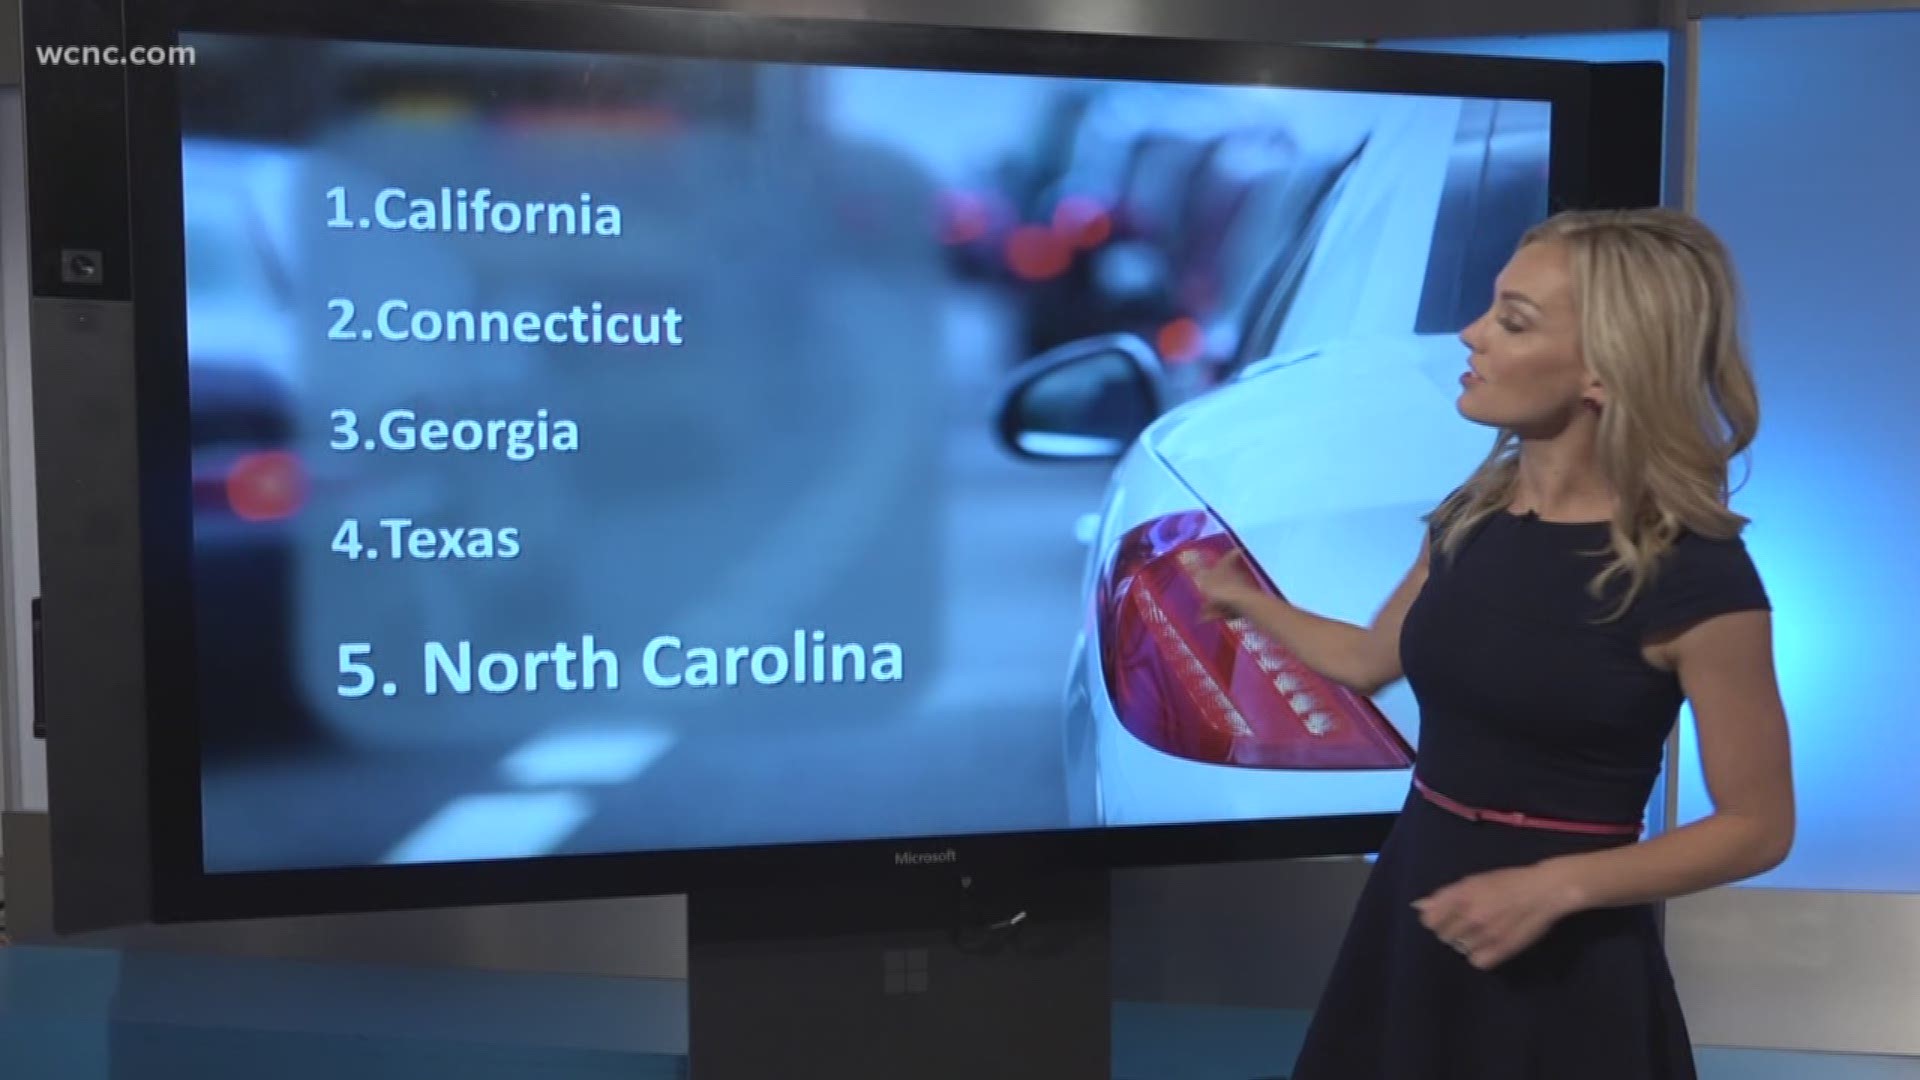 A new study from GasBuddy.com says North Carolina is home to some of the most aggressive drivers in America.